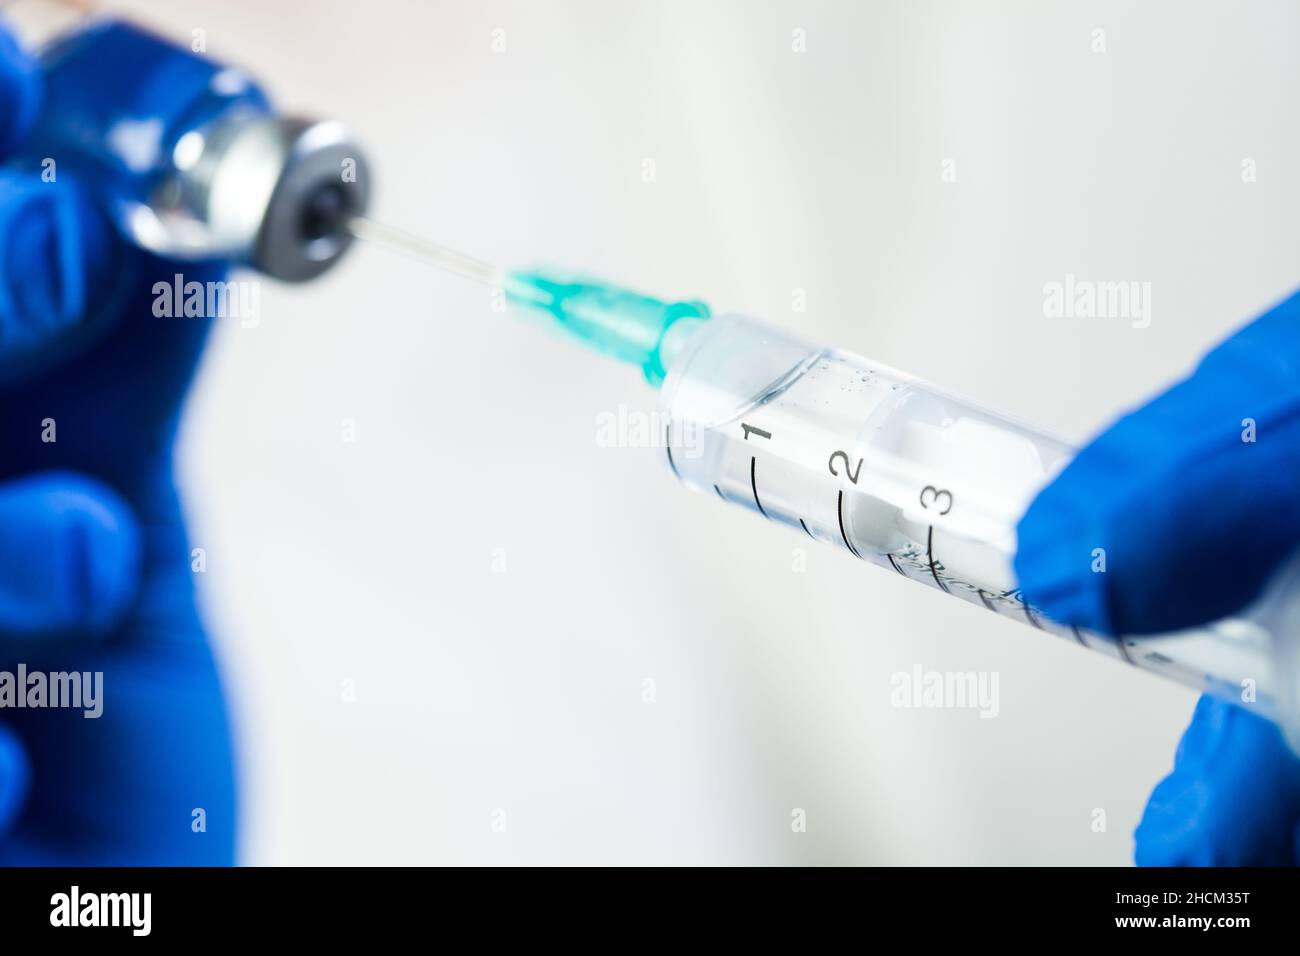 Macro closeup of syringe with needle in ampoule vial,details of blue latex gloves holding vaccination equipment,COVID-19 immunization procedure Stock Photo